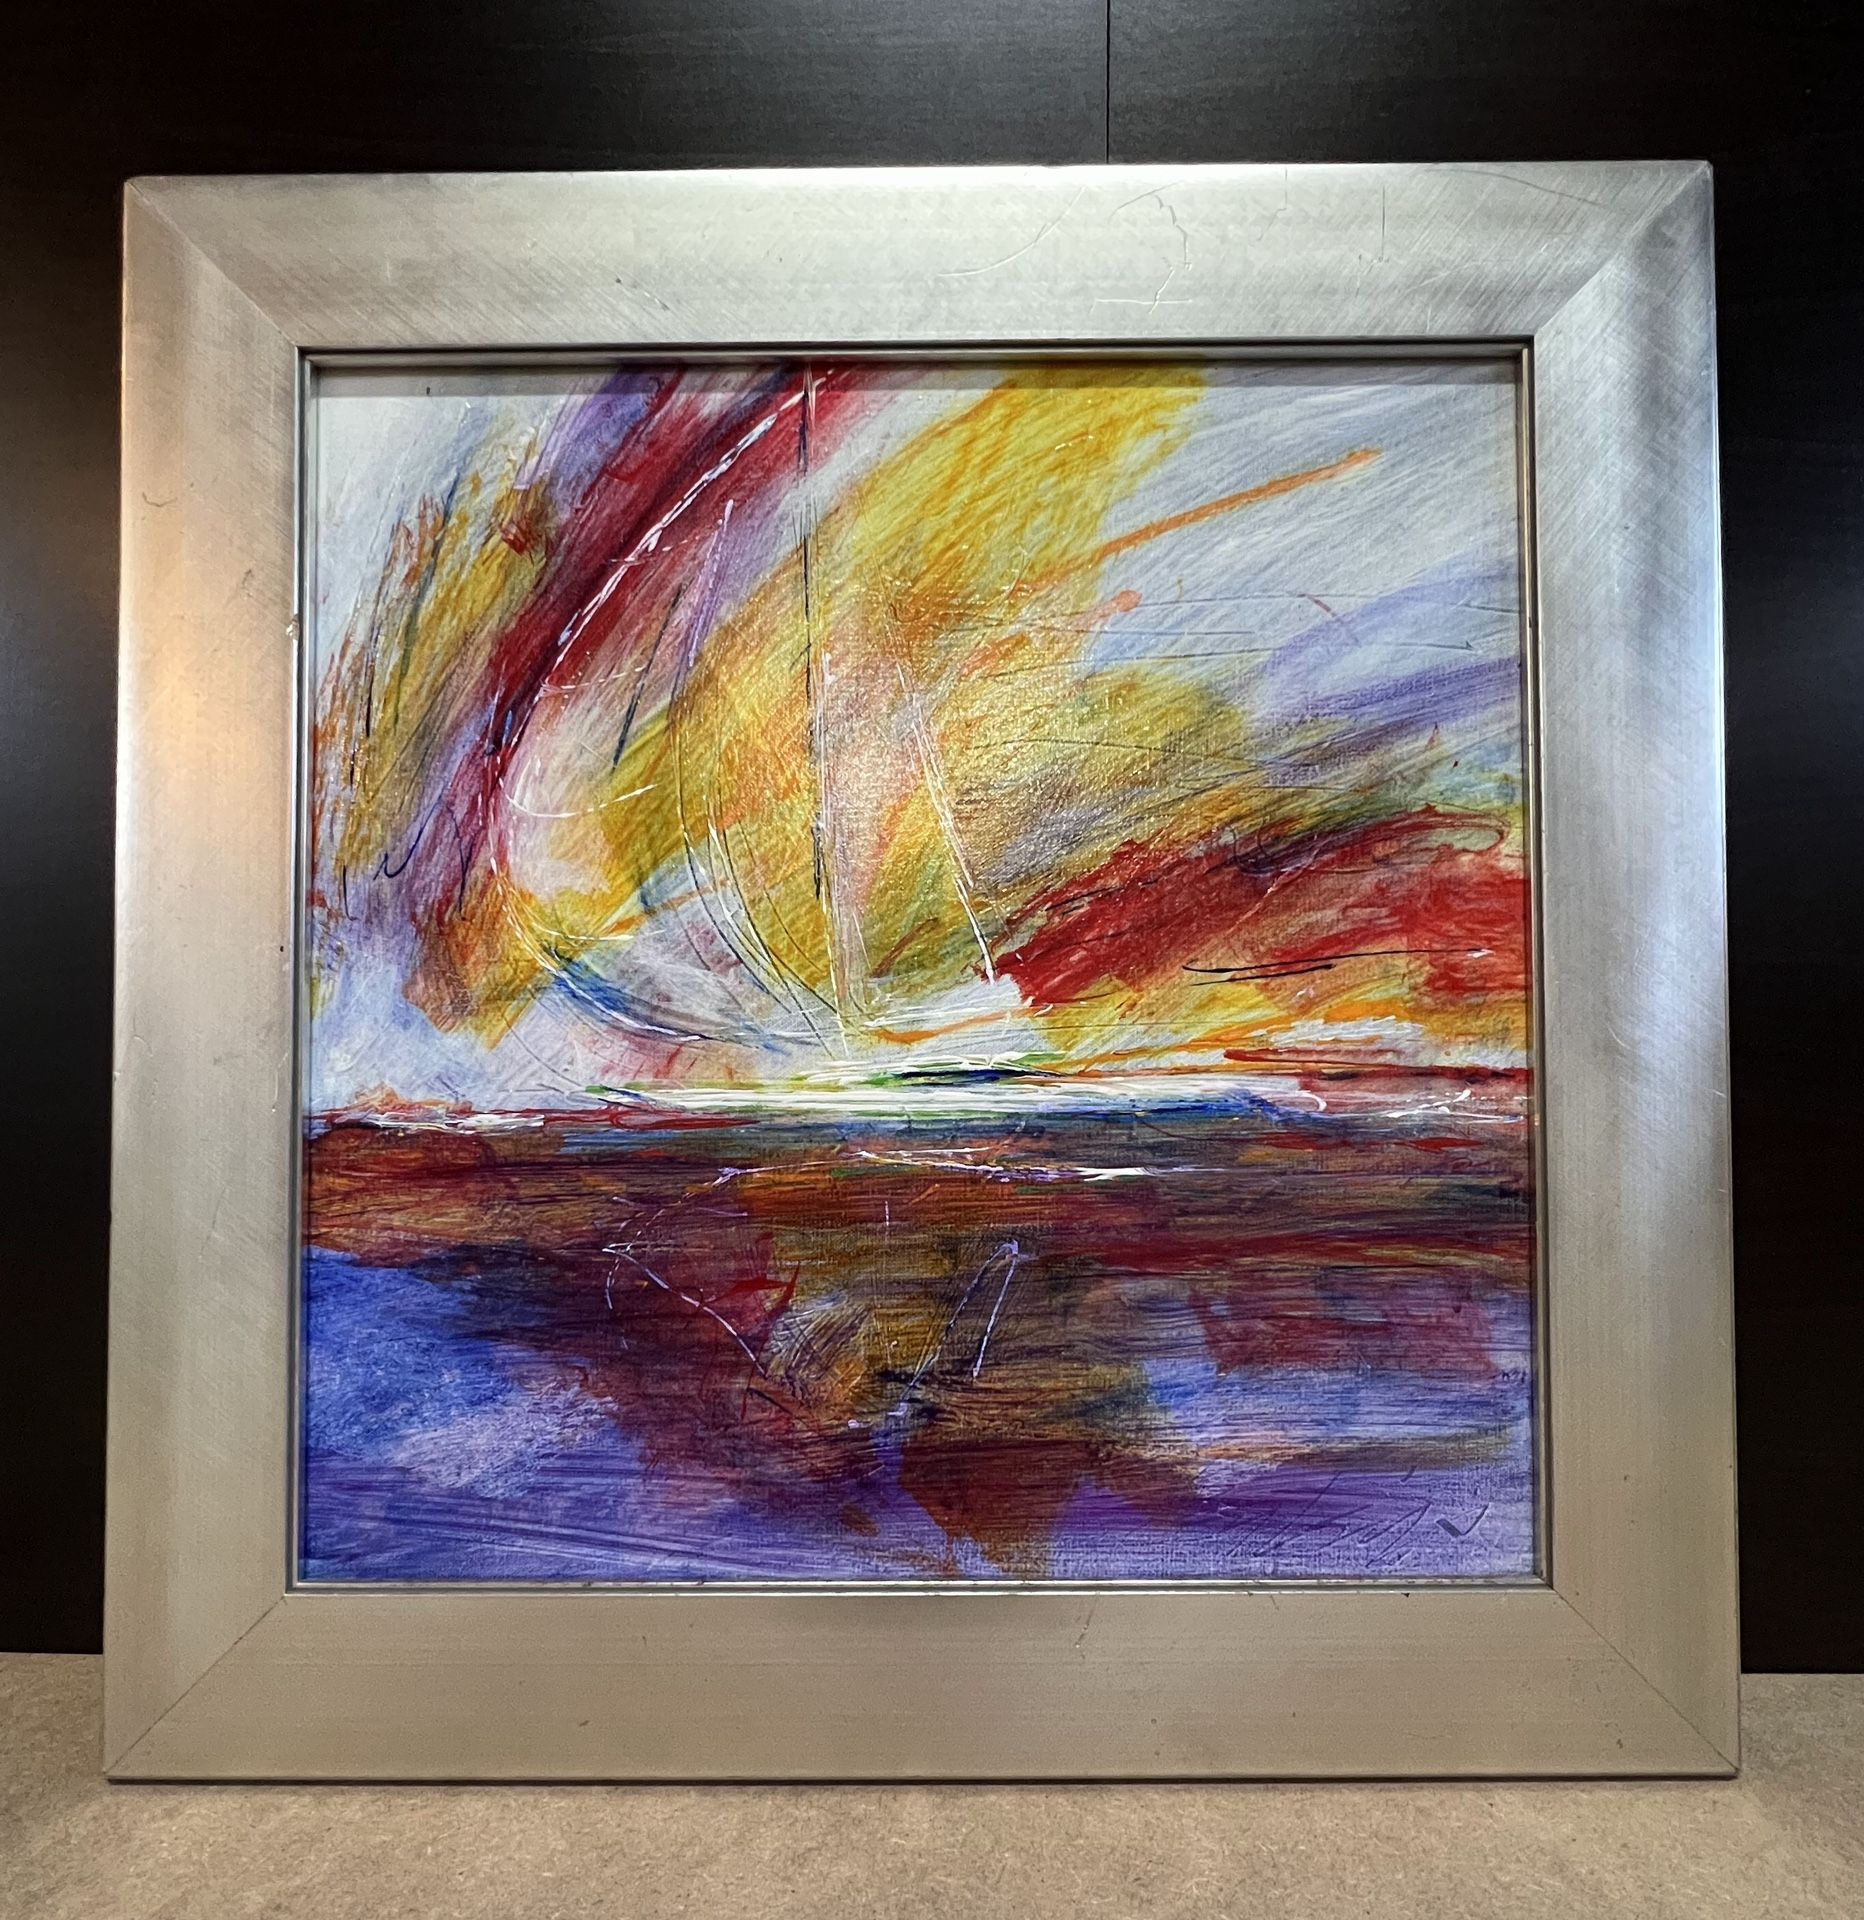 50% off SALE Abstract Oil painting of “Afternoon Sail” Signed &Framed 